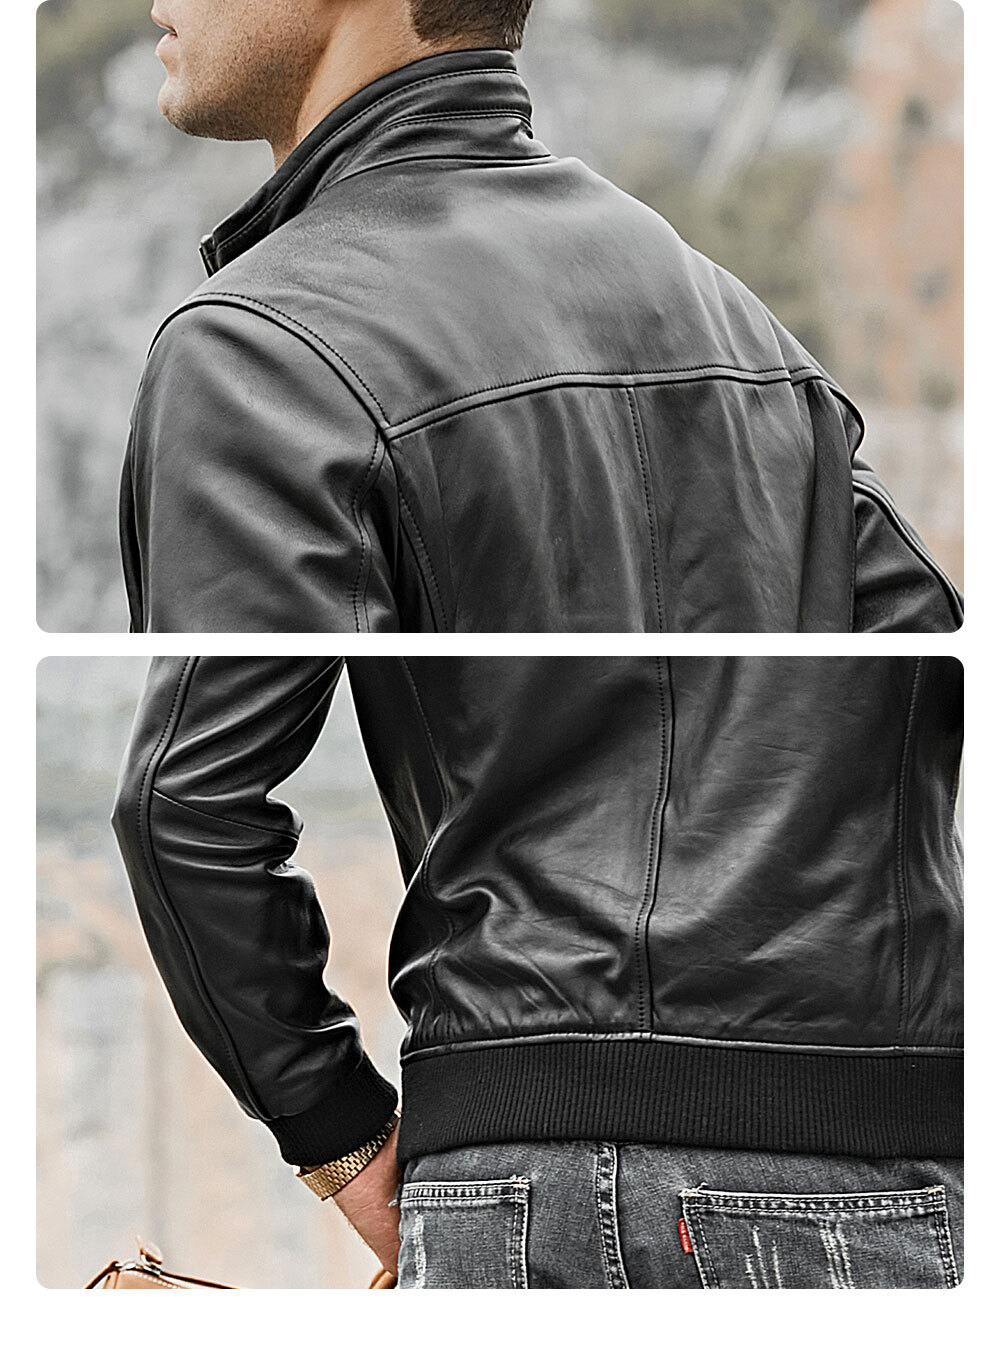 Men's Stand Collar Leather Motorcycle Jacket 17 Buy stand collar flavor leather motorcycle jacket| stand collar flavor leather motorcycle jacket brands